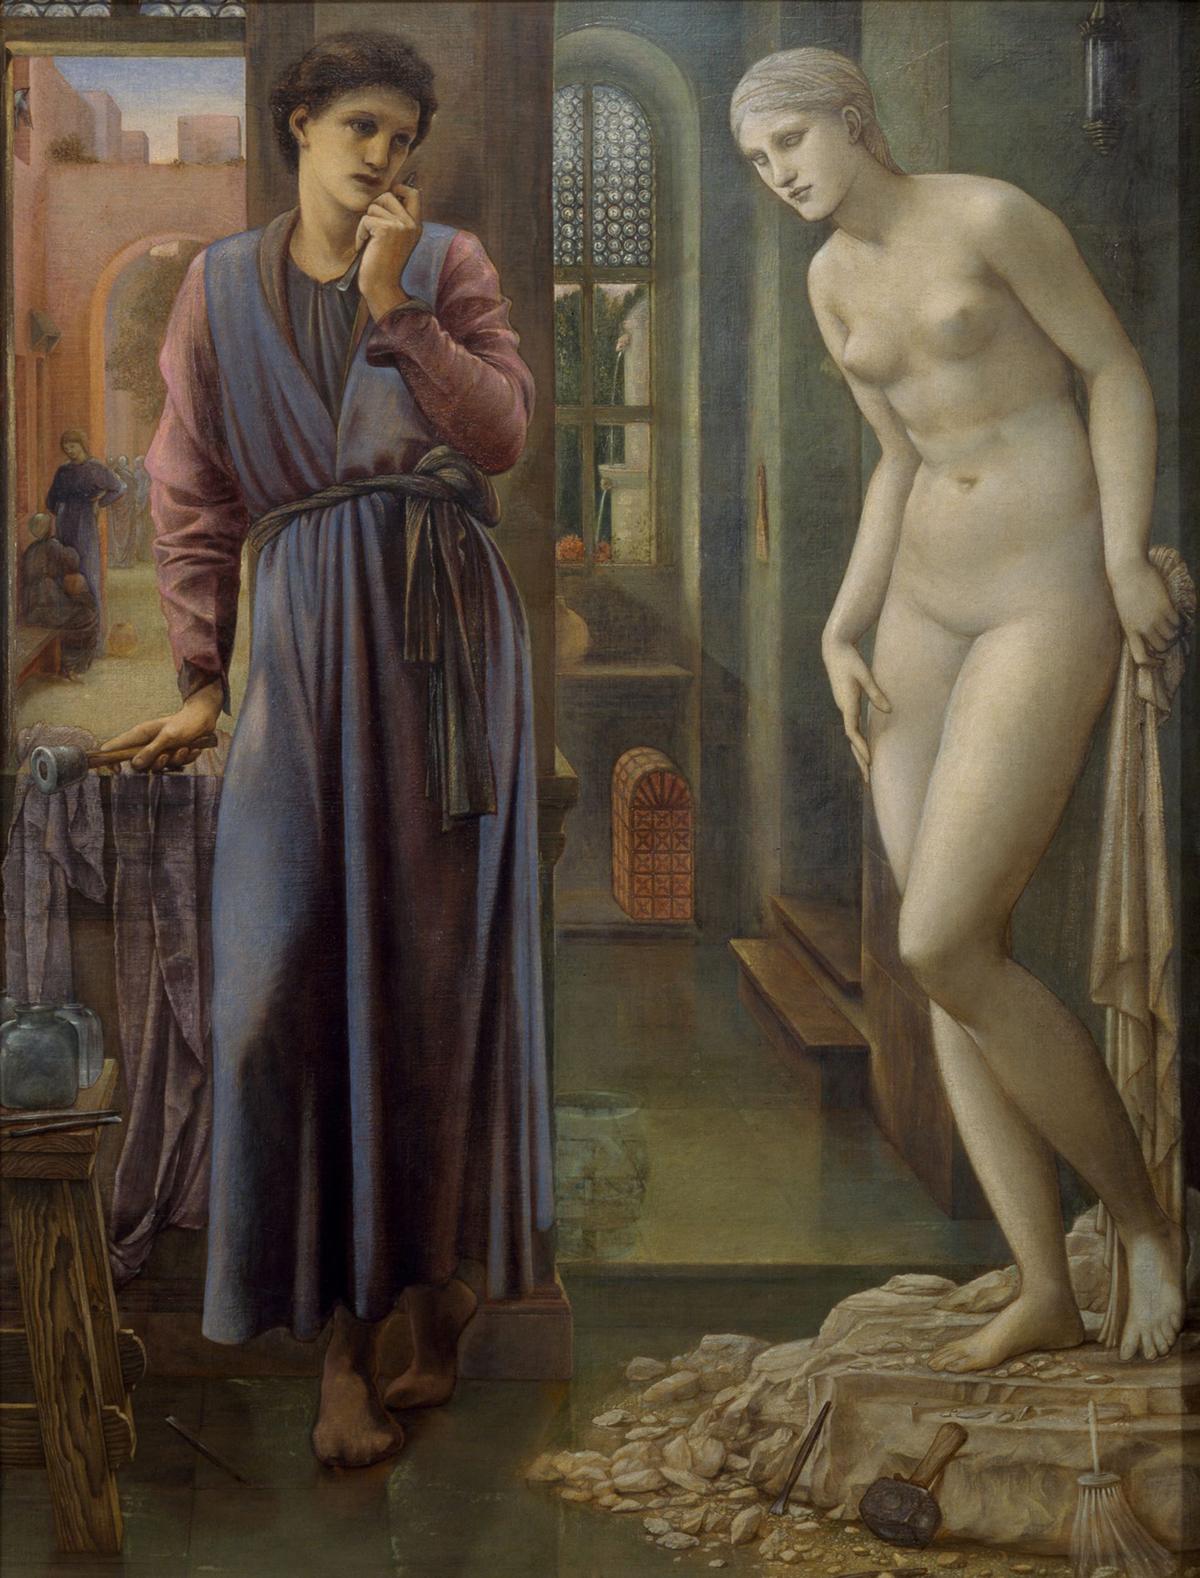 In turning away from earthly temptations, Pygmalion presumably reaches a higher level of moral excellence. "Pygmalion and the Image – The Hand Refrains," 1878, by Sir Edward Burne-Jones. Birmingham Museums Trust. (Public Domain)